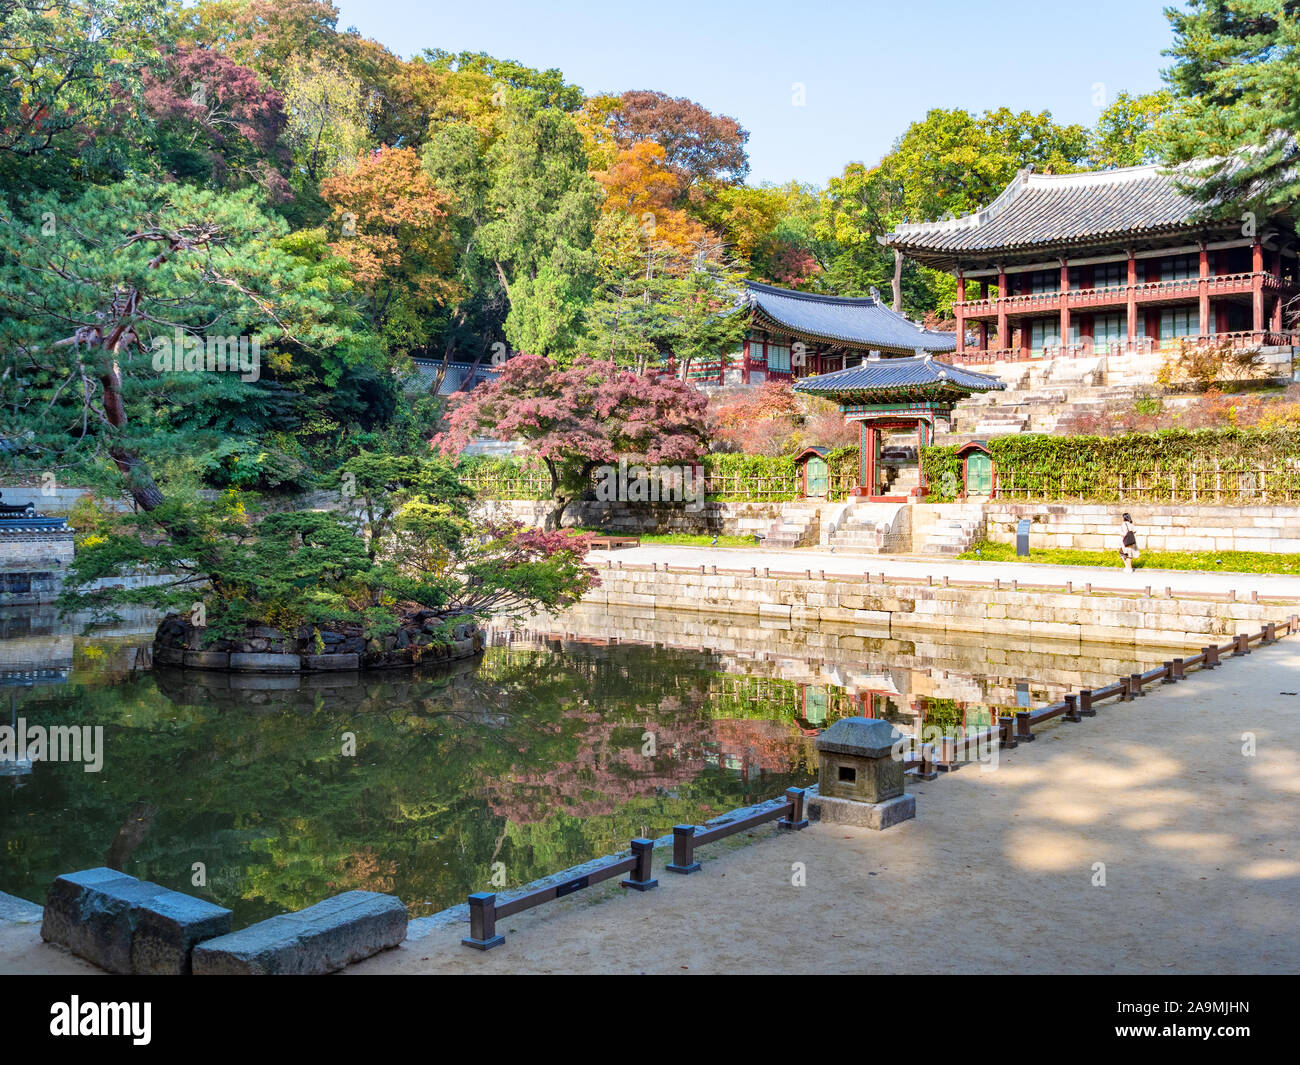 SEOUL, SOUTH KOREA - OCTOBER 31, 2019: visitor near Juhamnu building and Buyeongji pond in Huwon Secret Rear Garden of Changdeokgung Palace Complex in Stock Photo